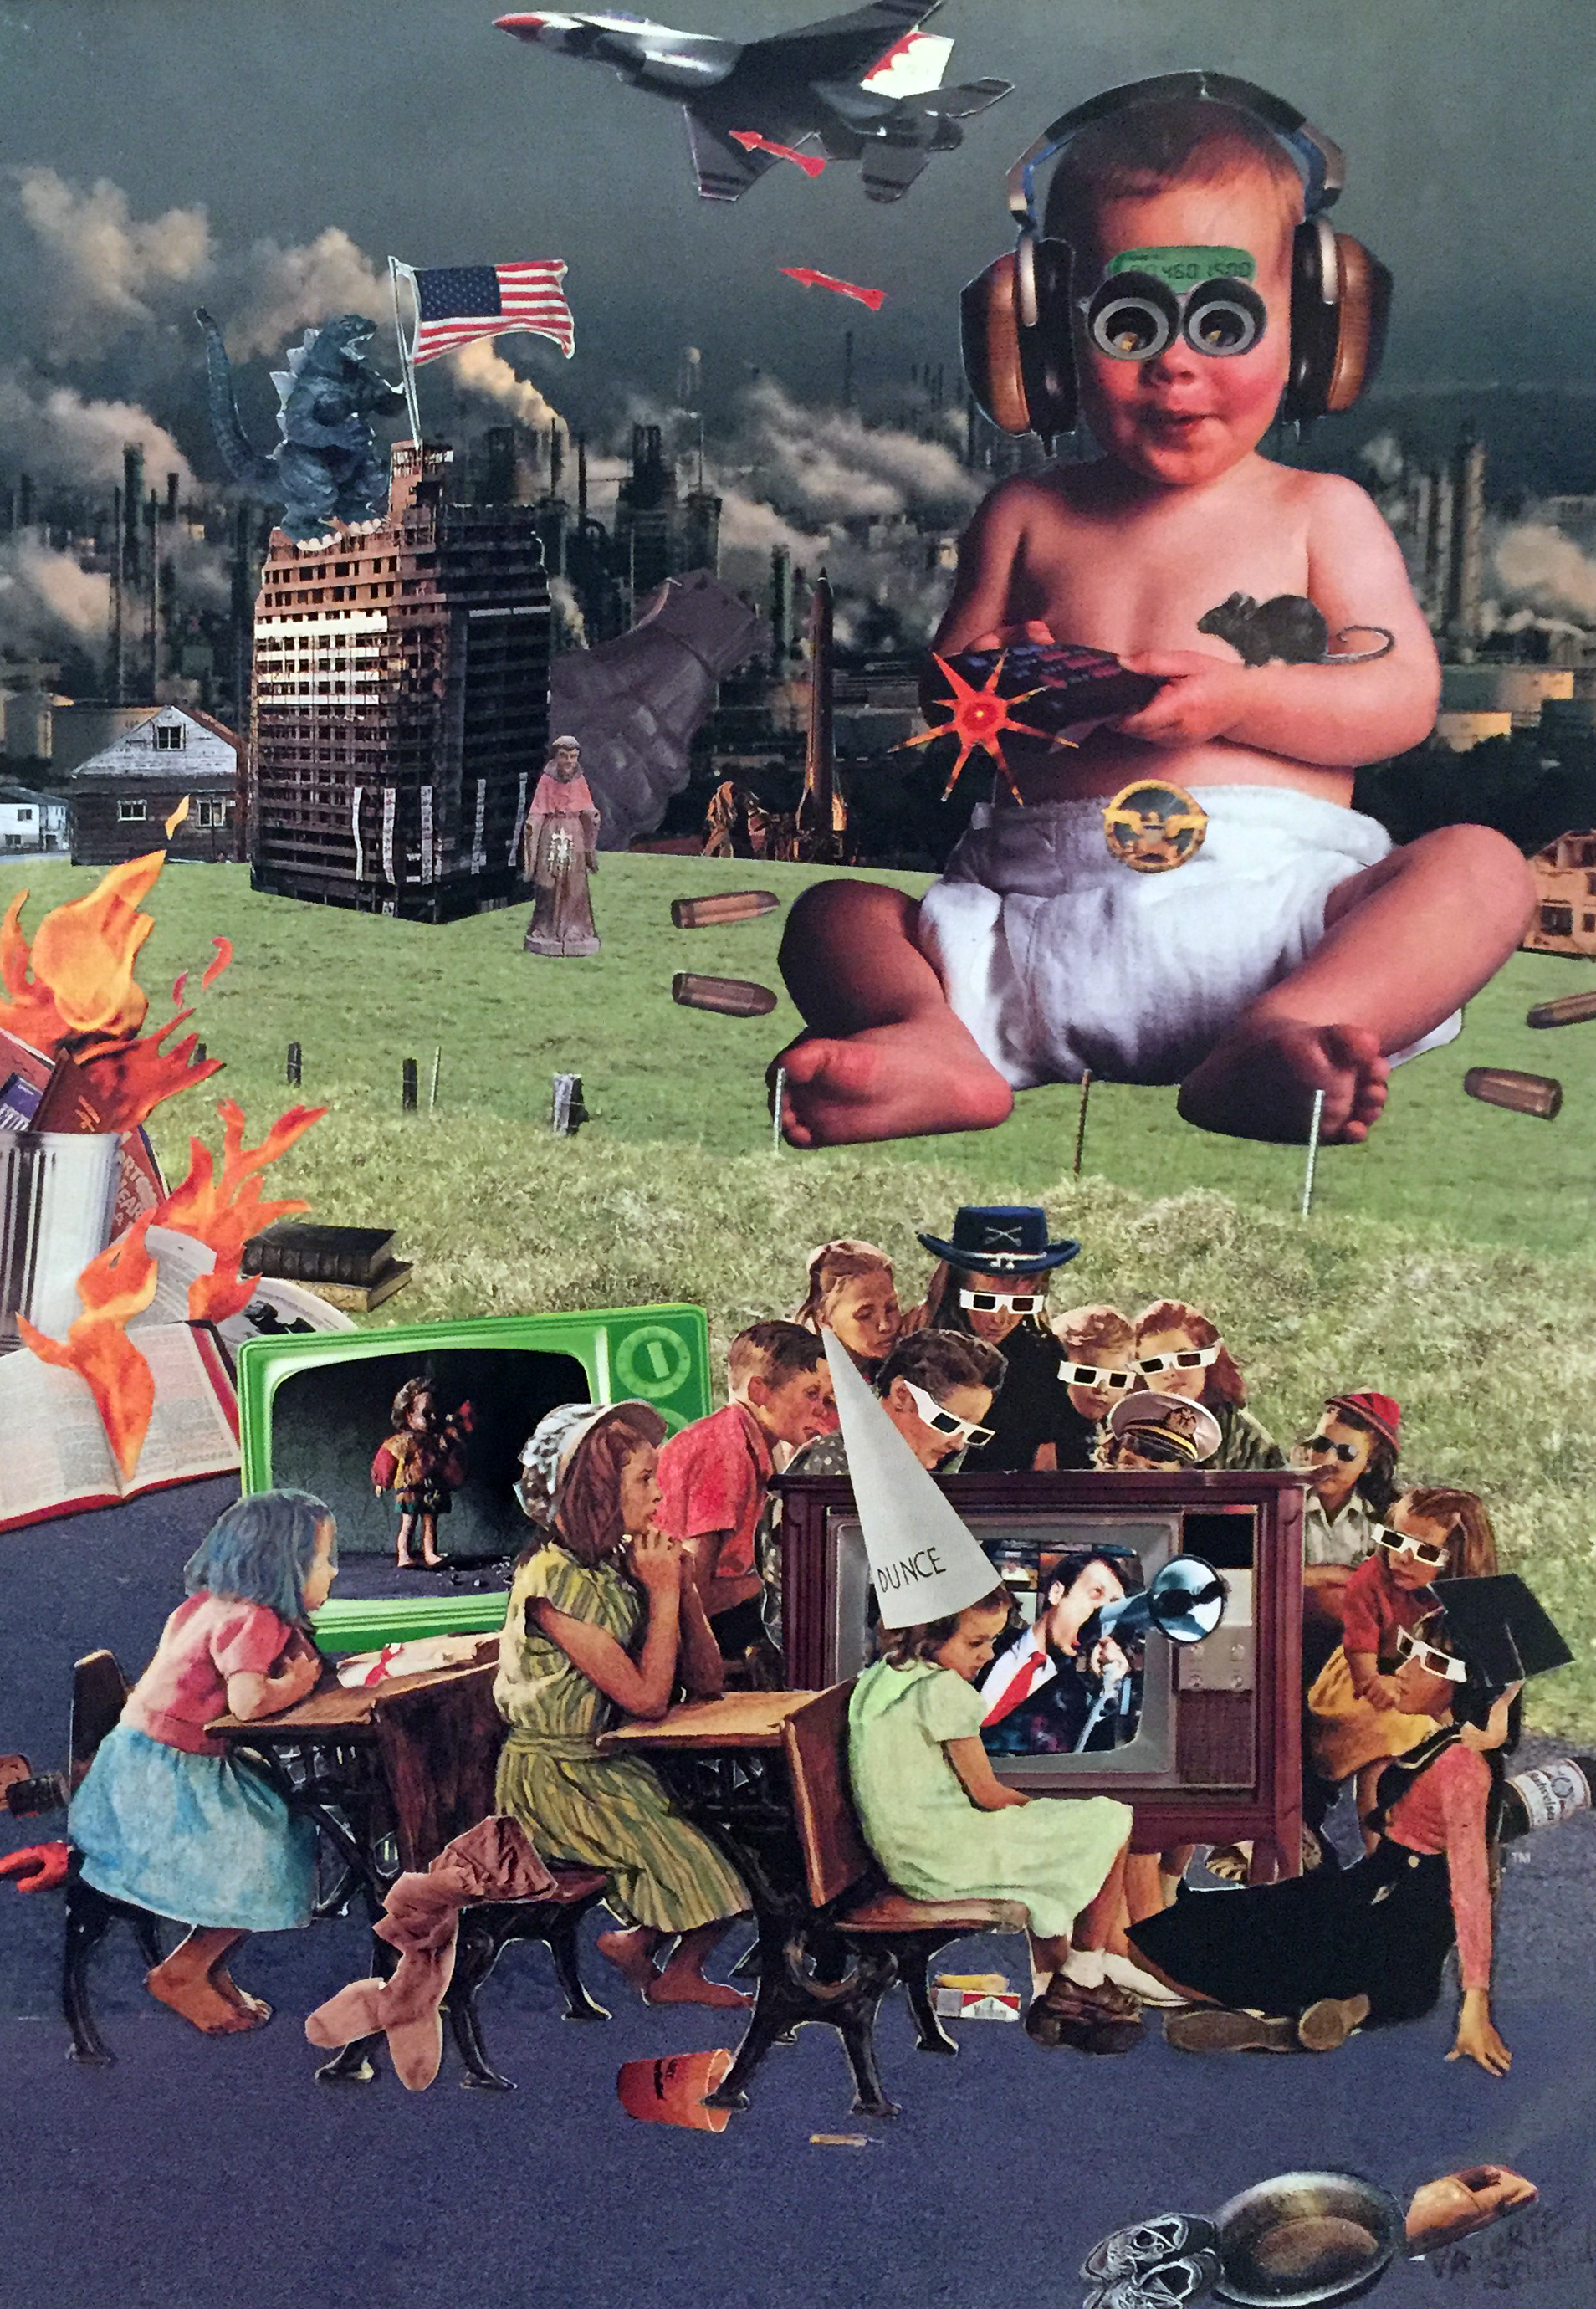 Collage of giant baby with remote control school children and burning books